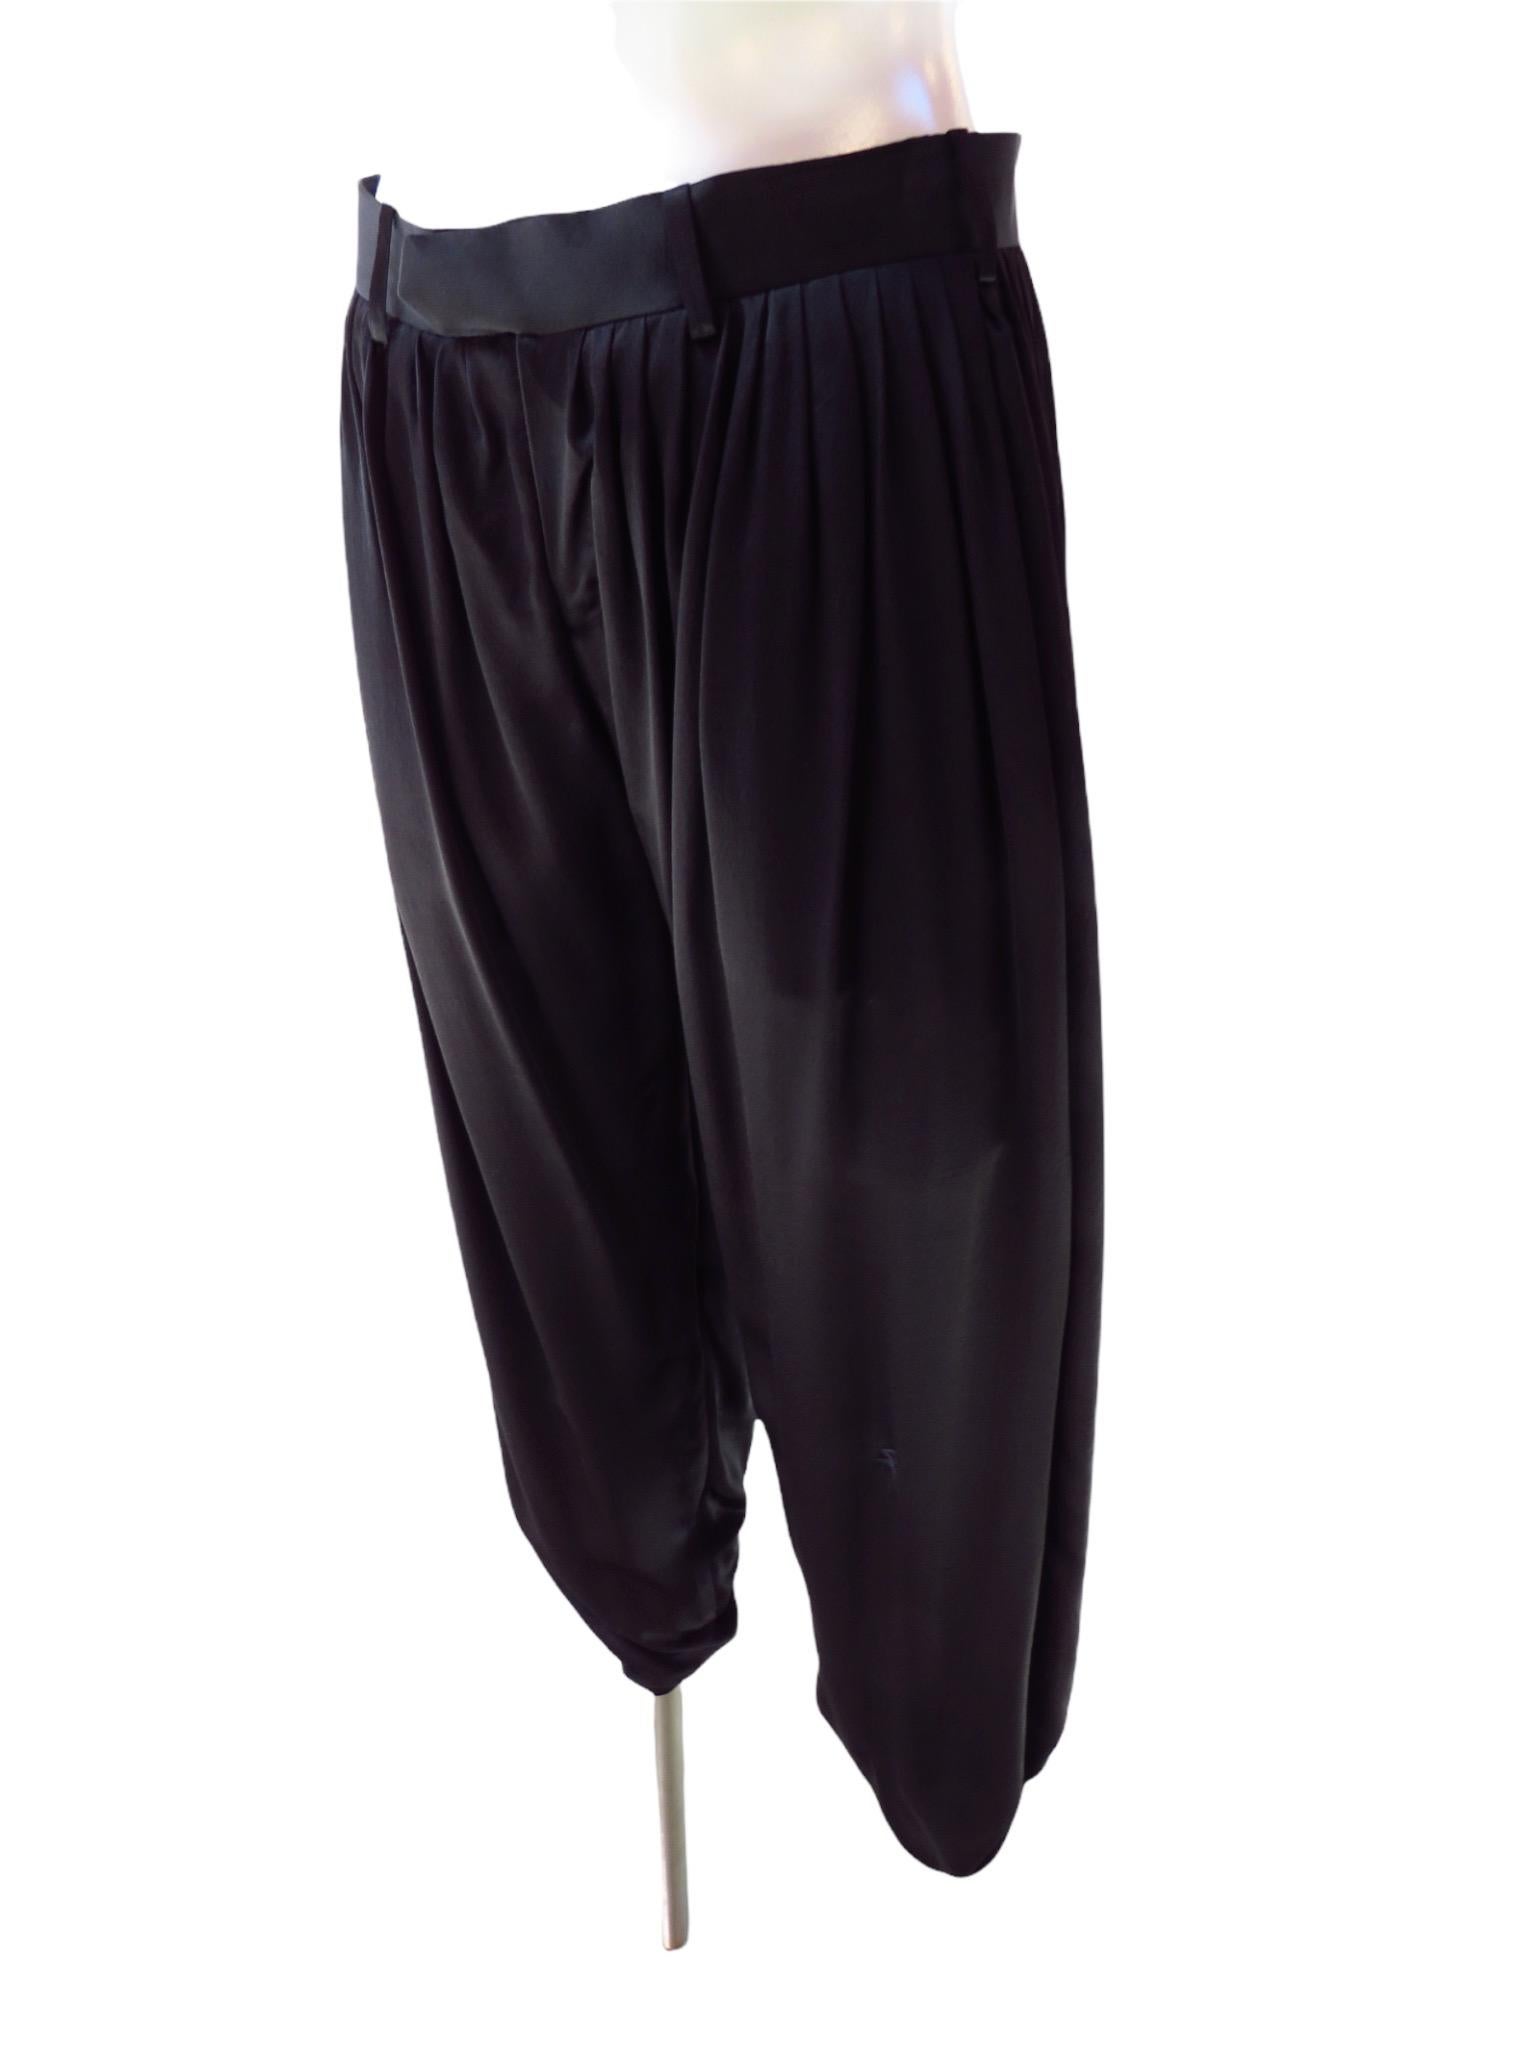 Undercover Black Pleated Silk Harem Pants For Sale 6